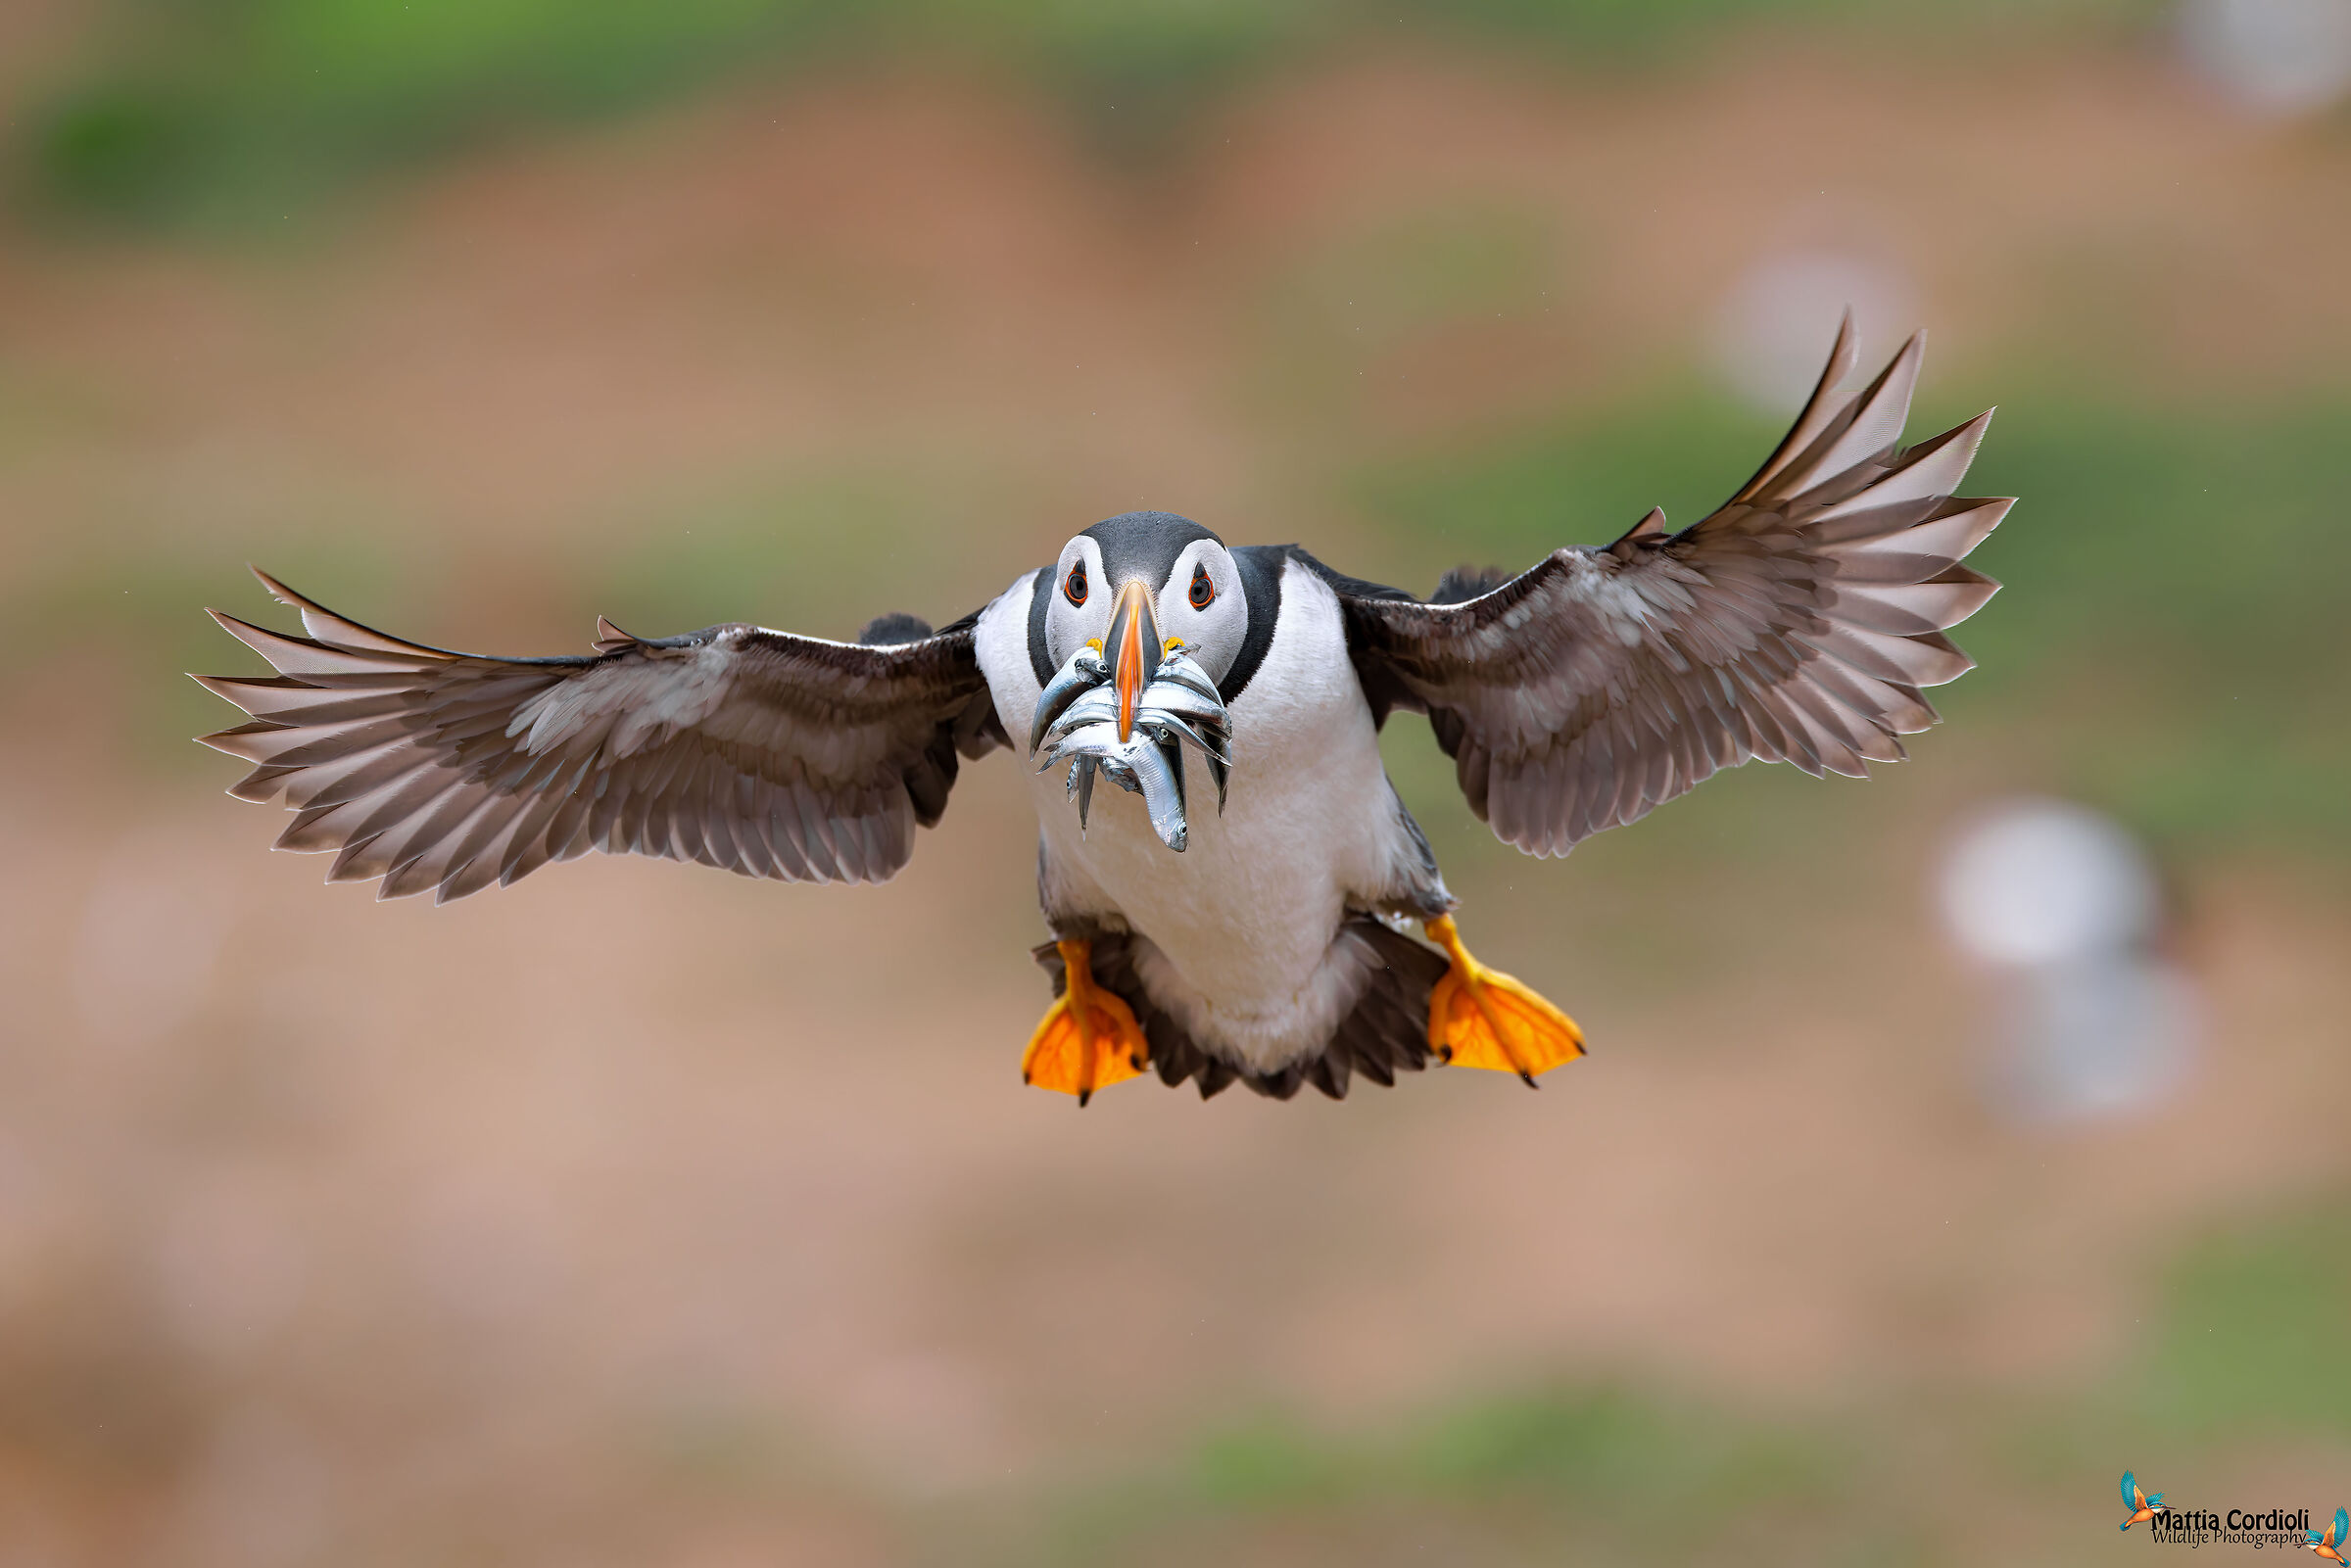 Puffin in flight with prey...